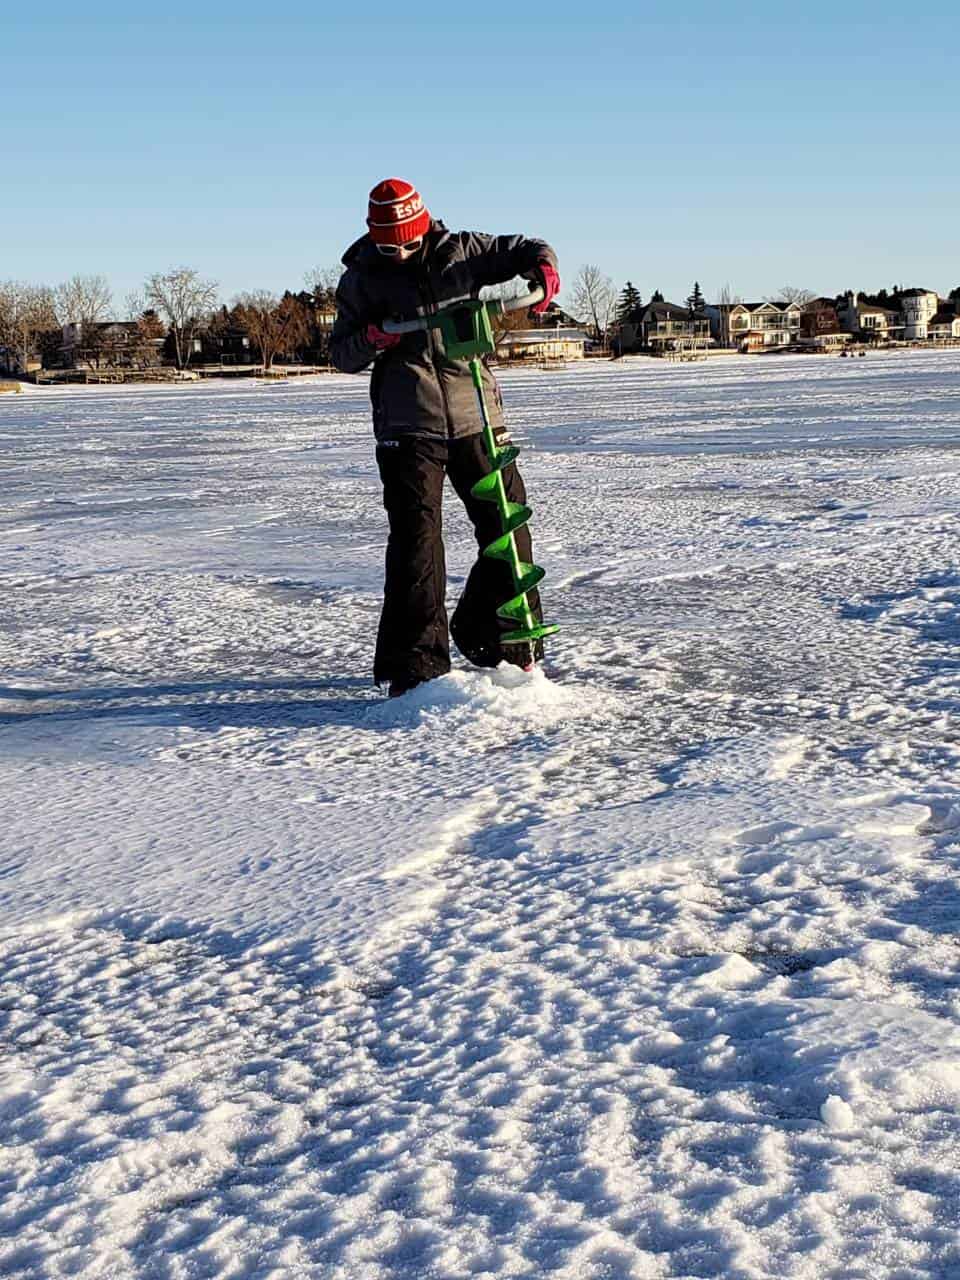 Drilling Ice Fishing Holes - Battery powered augers make life so much easier :)